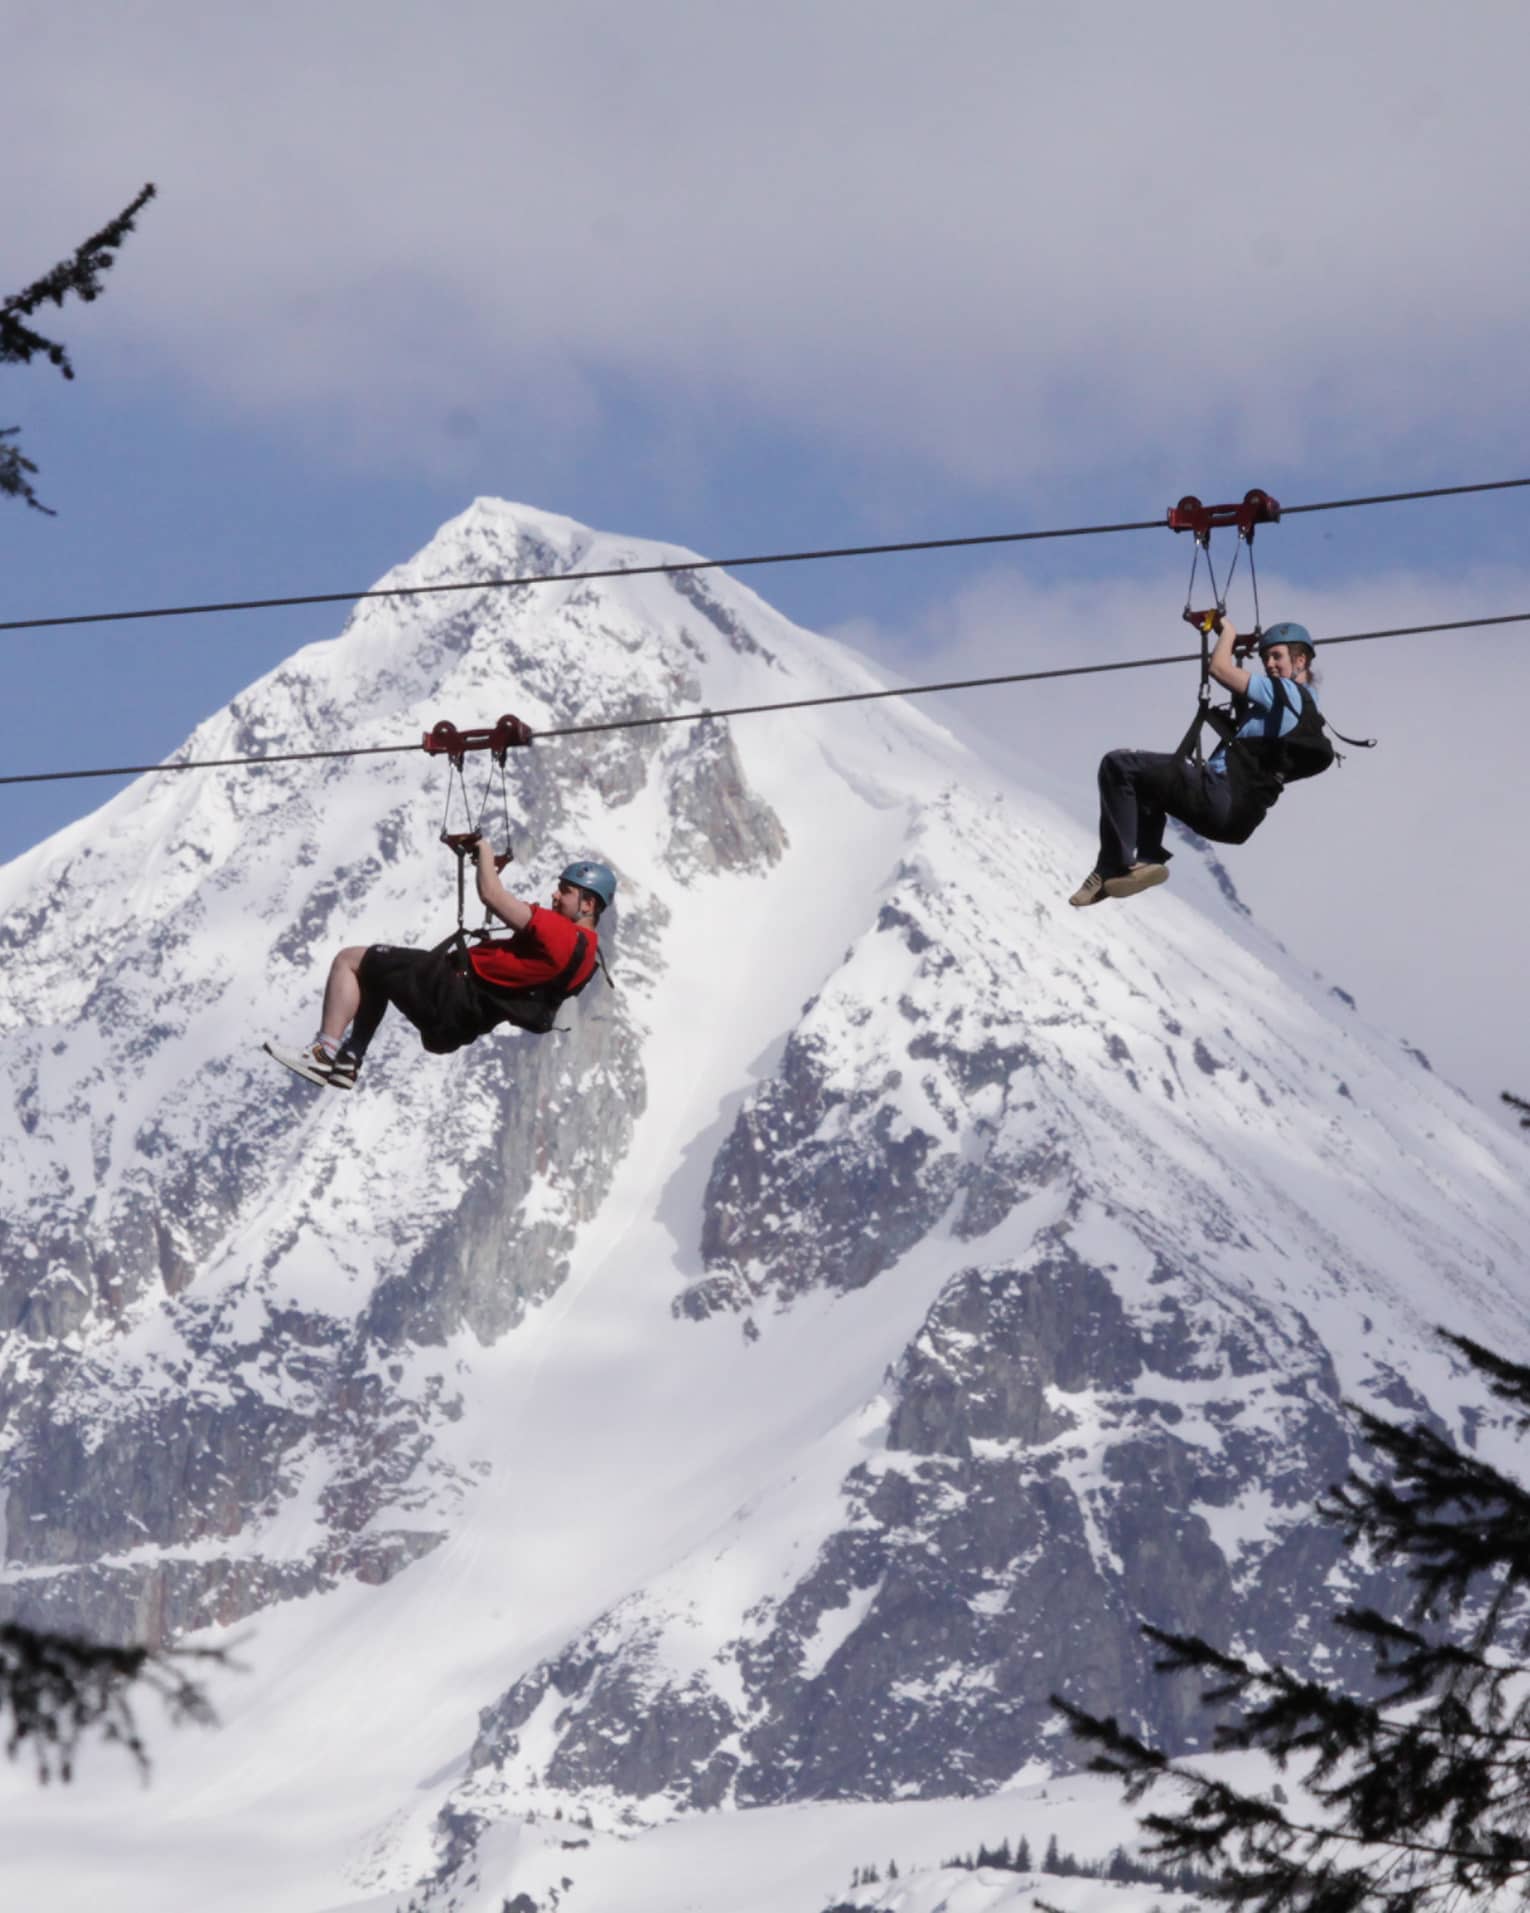 Two people zipline past pine trees with snowy mountain in background 